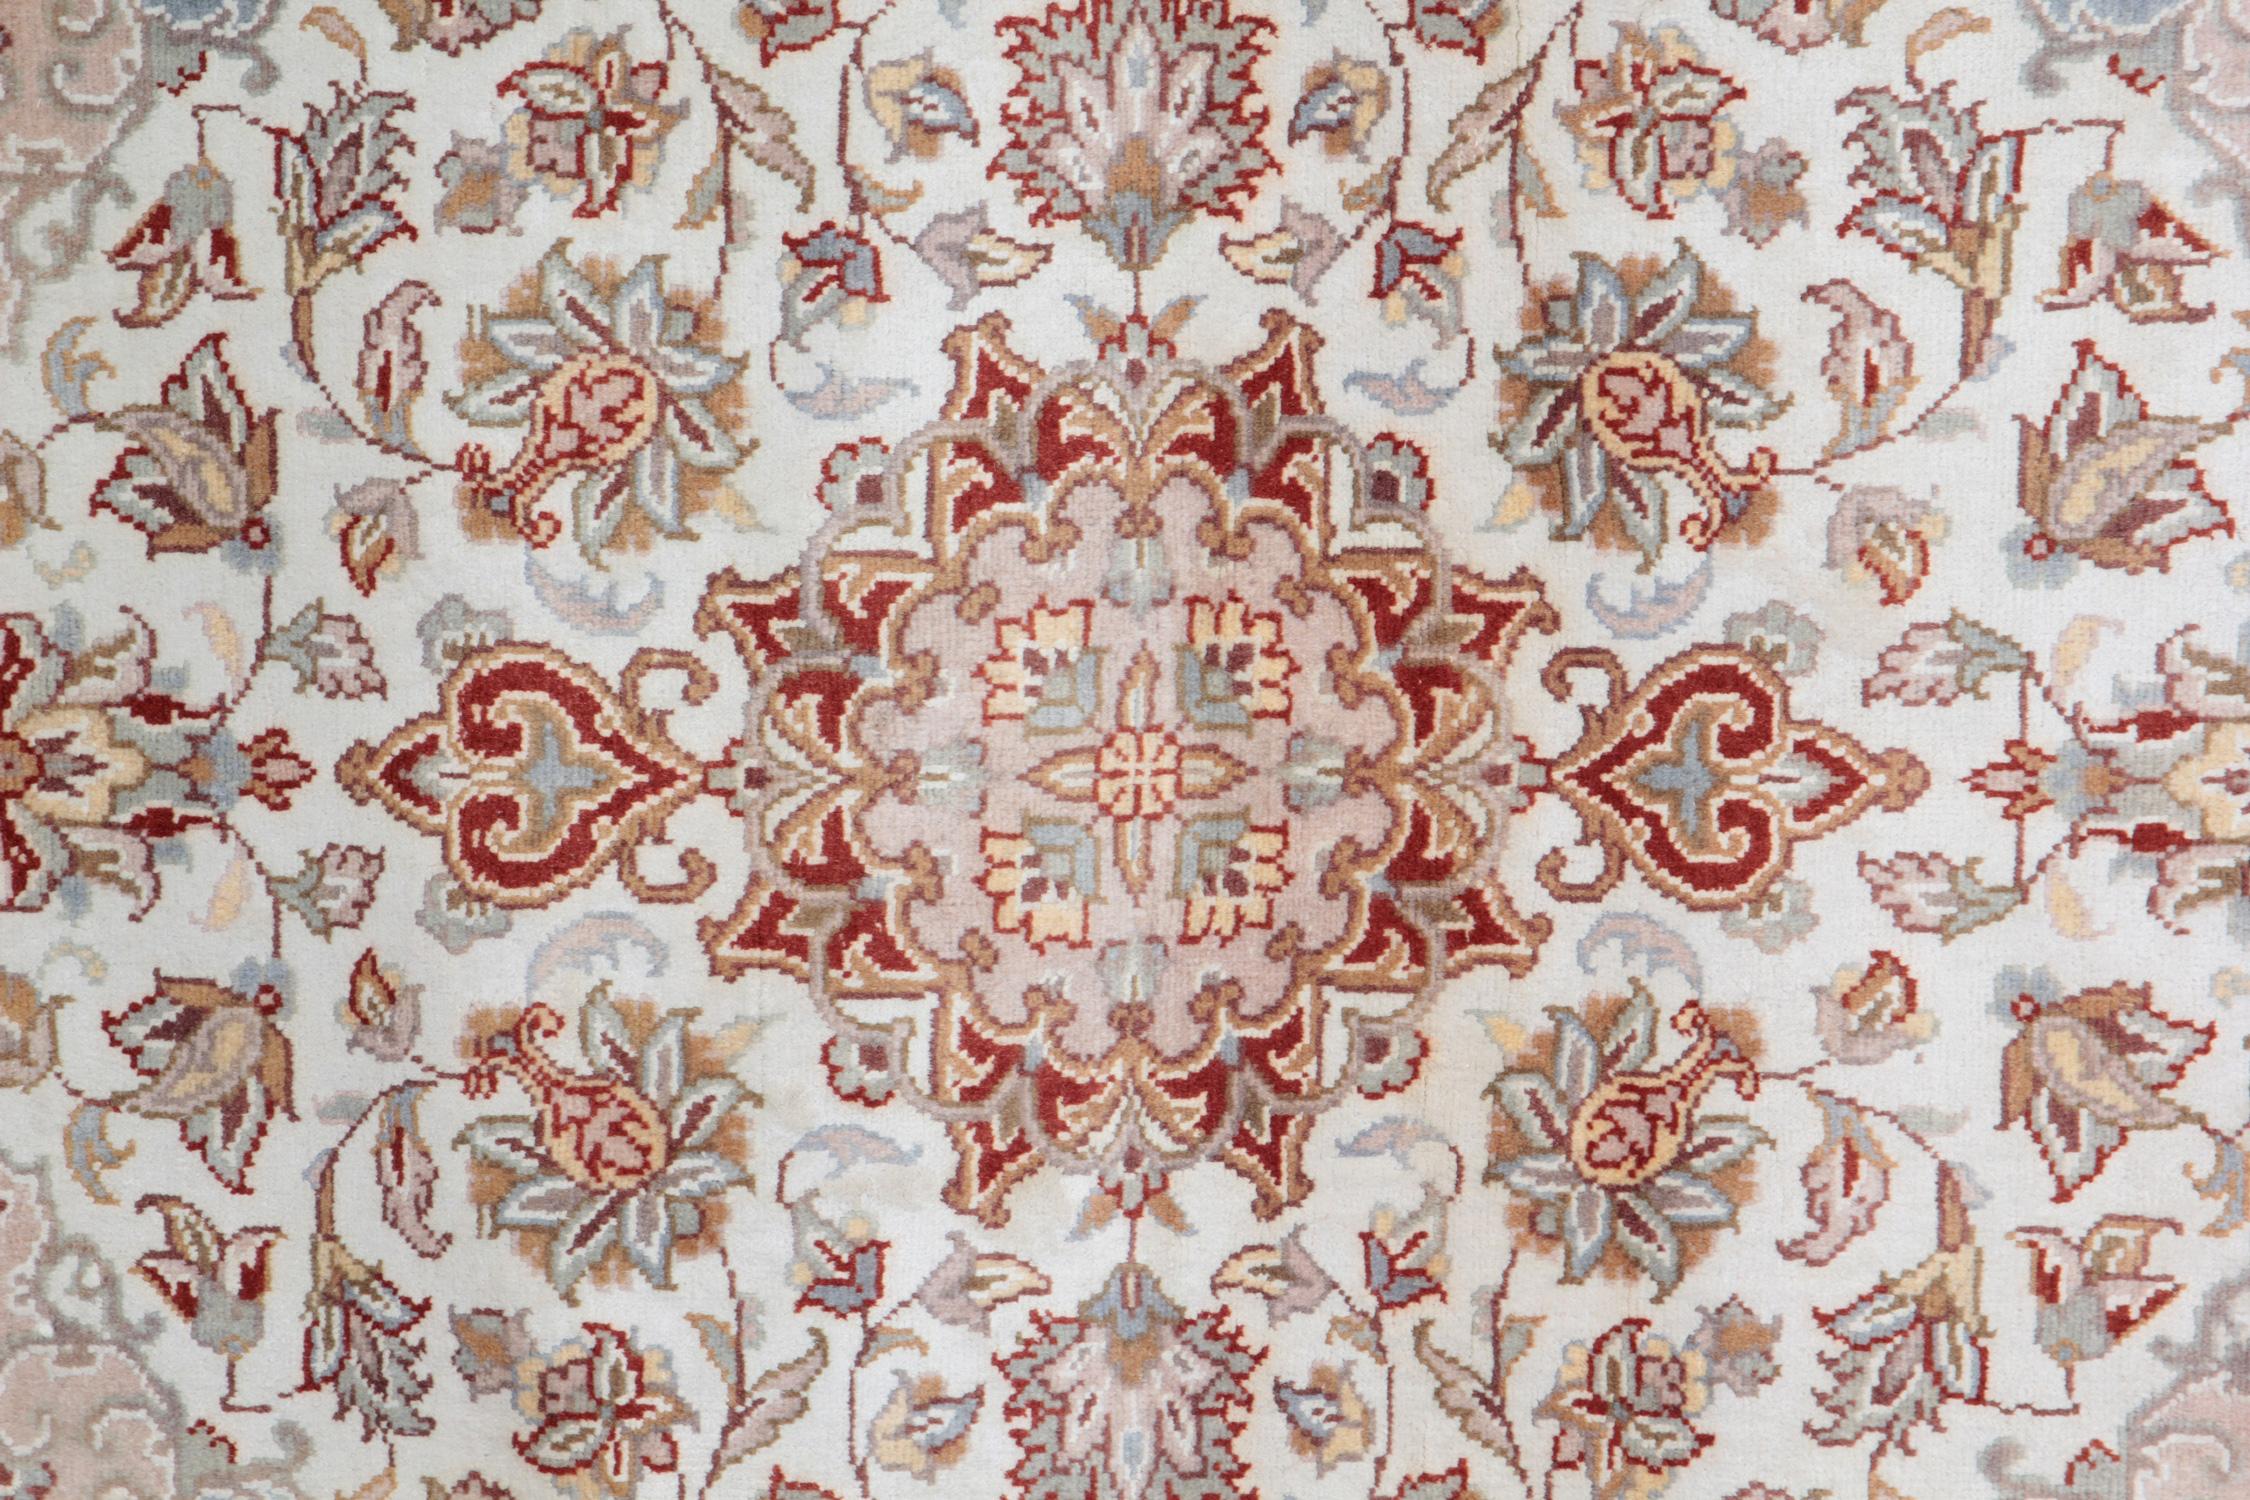 Sultanabad Traditional Area Rugs, Indian Carpet Cream Rug, Floor Rugs for Sale Red Border